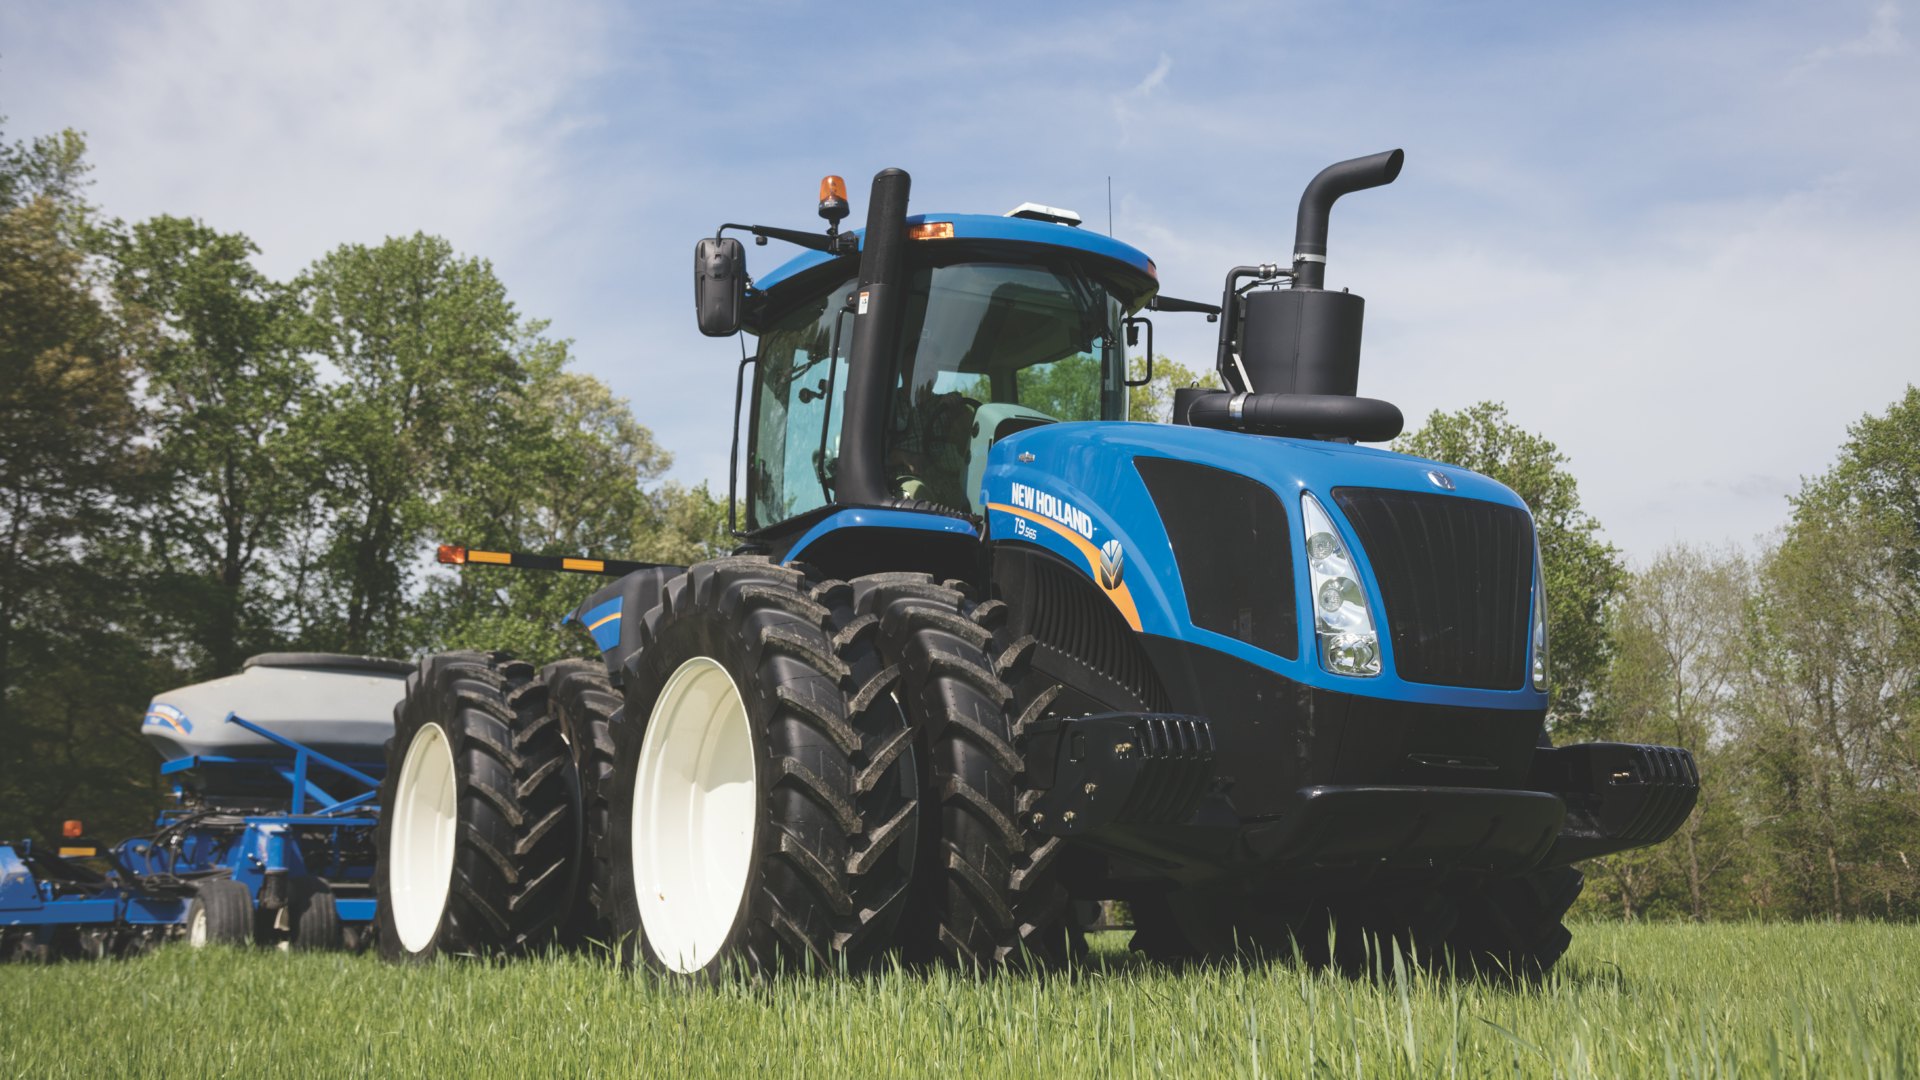 New holland t. New Holland tractors. Трактор New Holland. Трактор New Holland t9. Нью Холланд трактор 9.550.